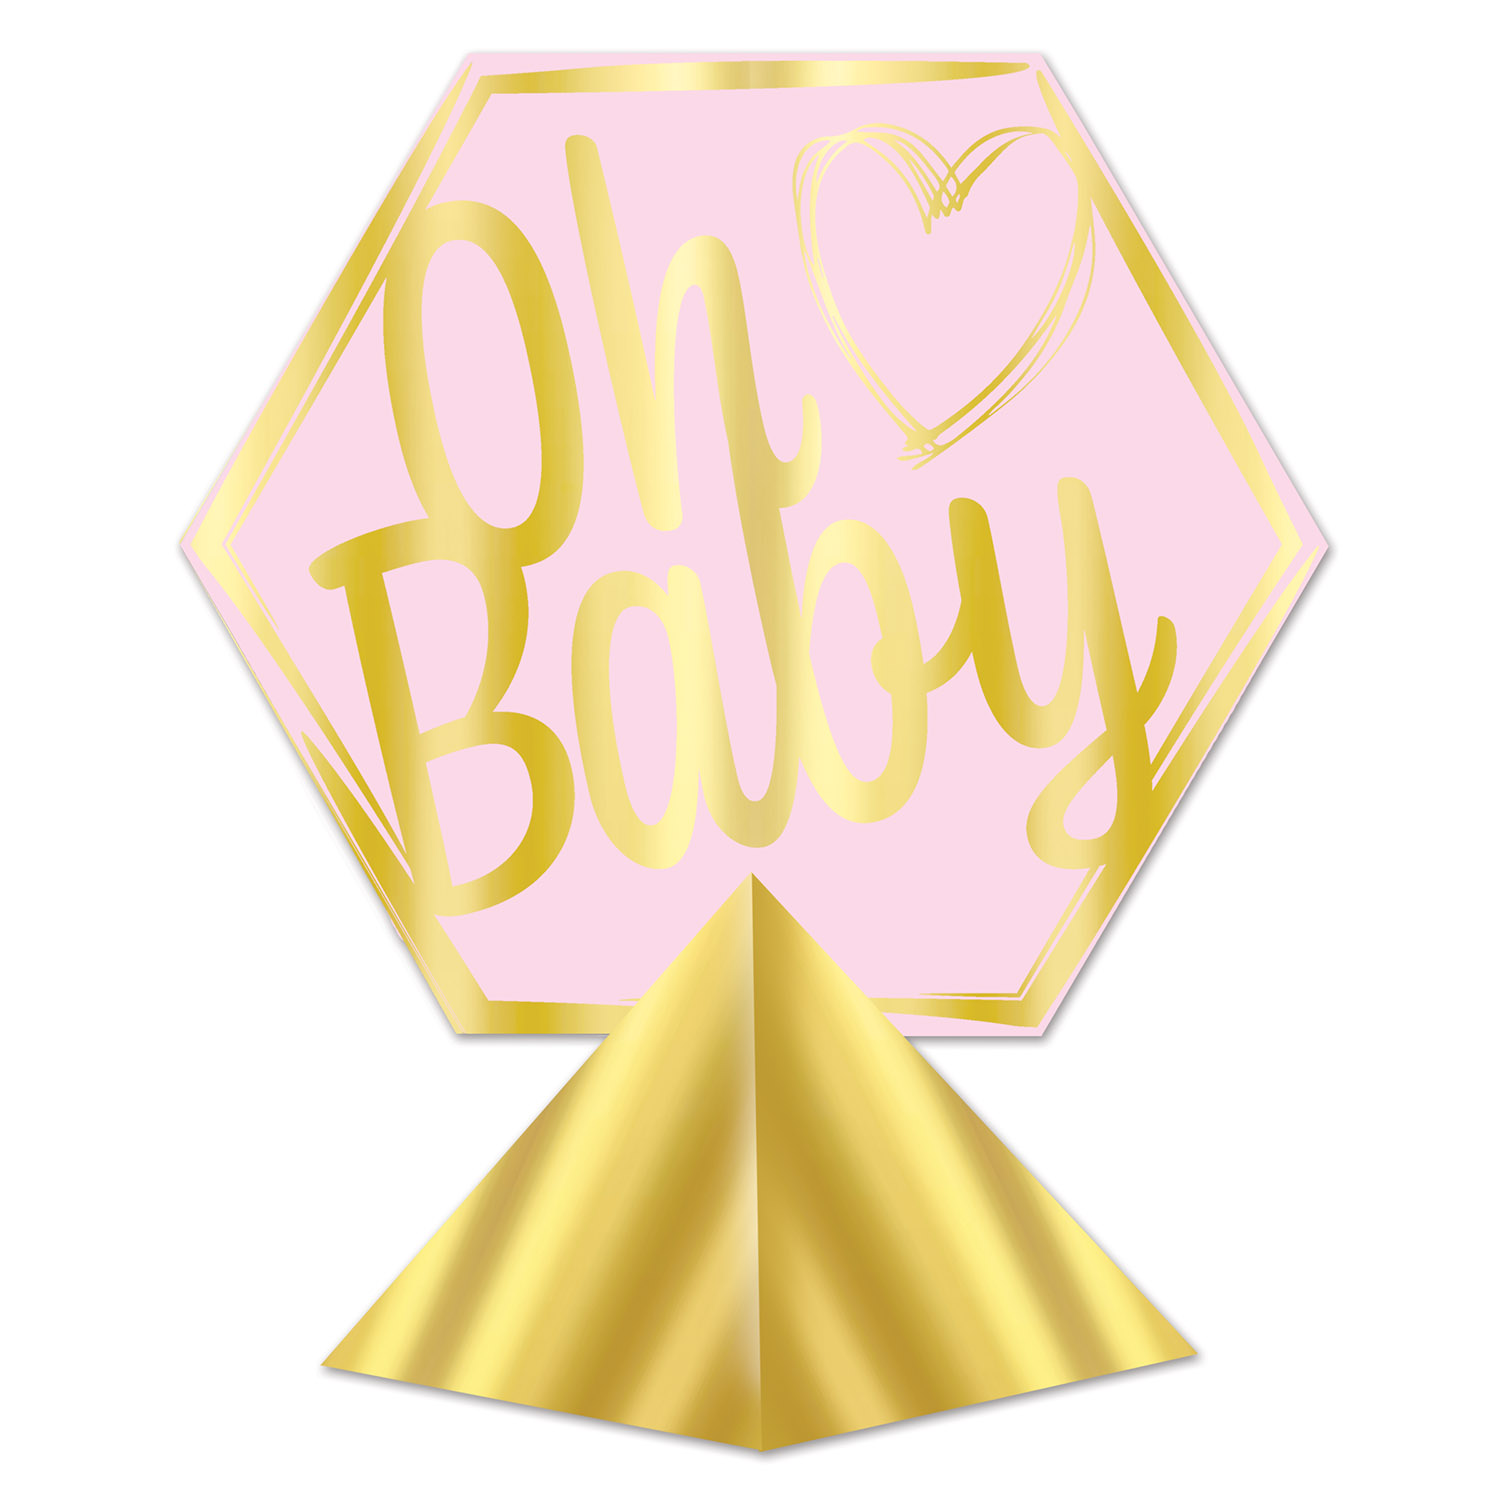 Image of 3-D FOIL OH BABY CENTERPIECE (12)